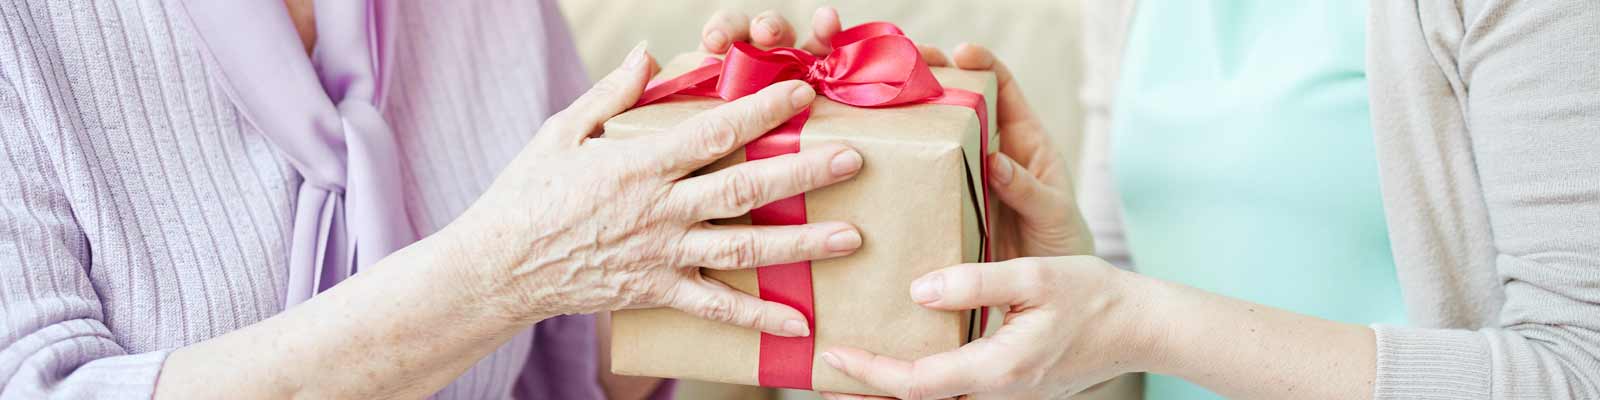 Looking for Christmas Gifts for those with Alzheimer's? - Browse the Alzheimer's Store for the best holiday gifts - The best products and gift items for those with Alzheimer's, Dementia, Stroke, Memory Loss and for senior care